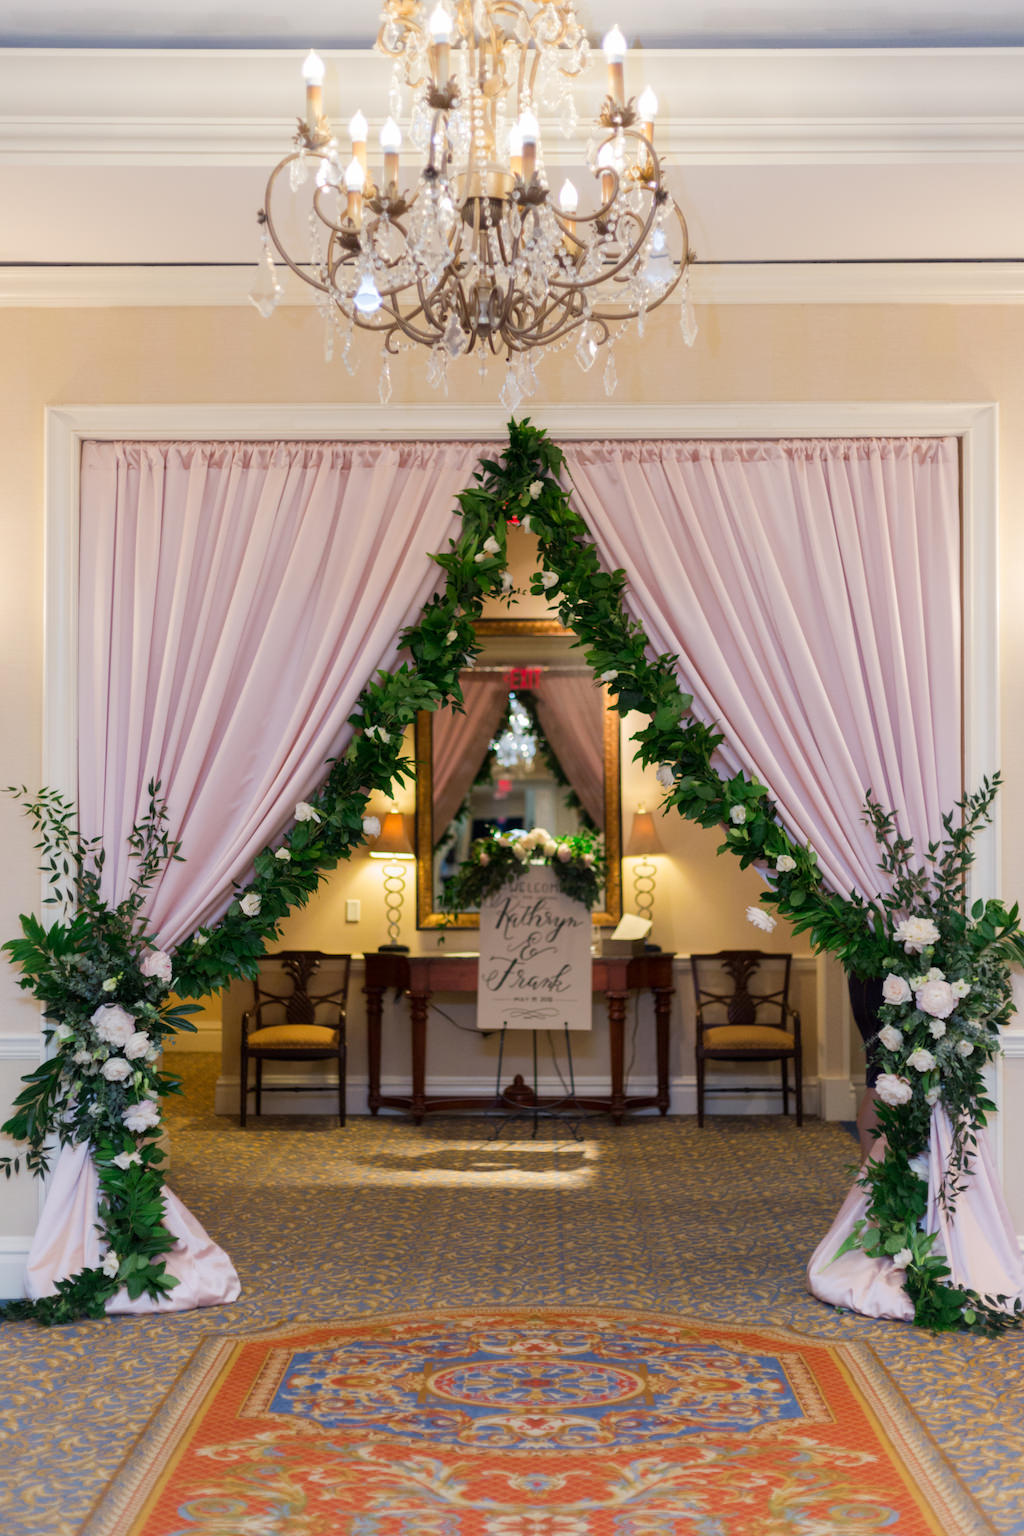 Blush Pink Drapery, Greenery Garland with Ivory Florals Curtain Entrance for Wedding Reception | Tampa Bay Linens Rental Company Over the Top Linens